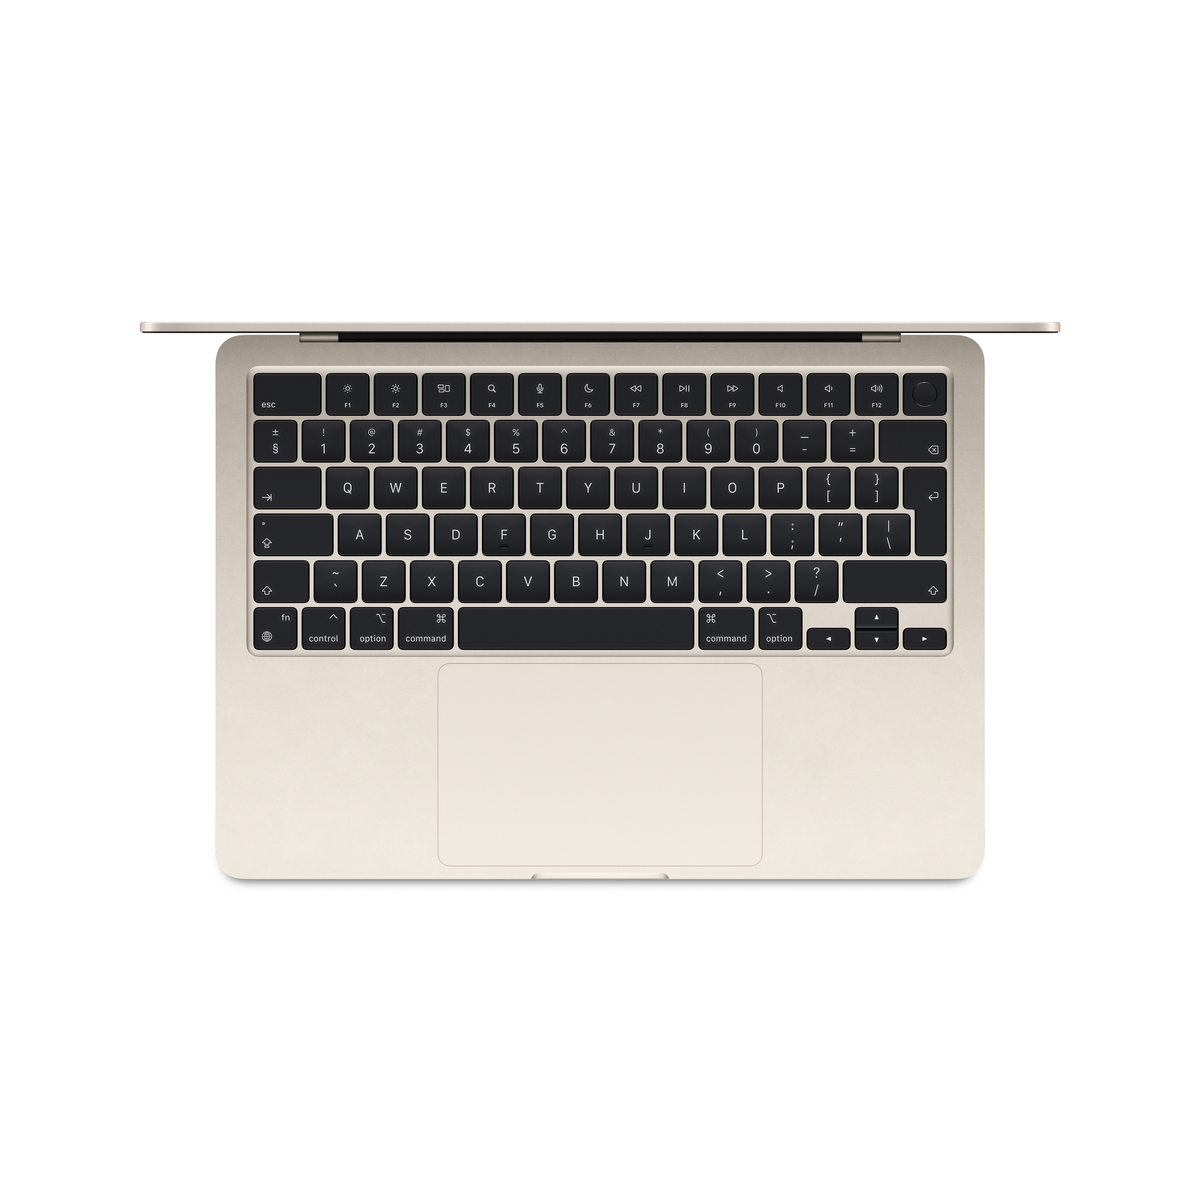 Apple MacBook Air, 13 inches, 8 GB RAM, 512 GB SSD, Apple M3 chip with 8-core CPU and 10-core GPU, macOS, Arabic, Starlight